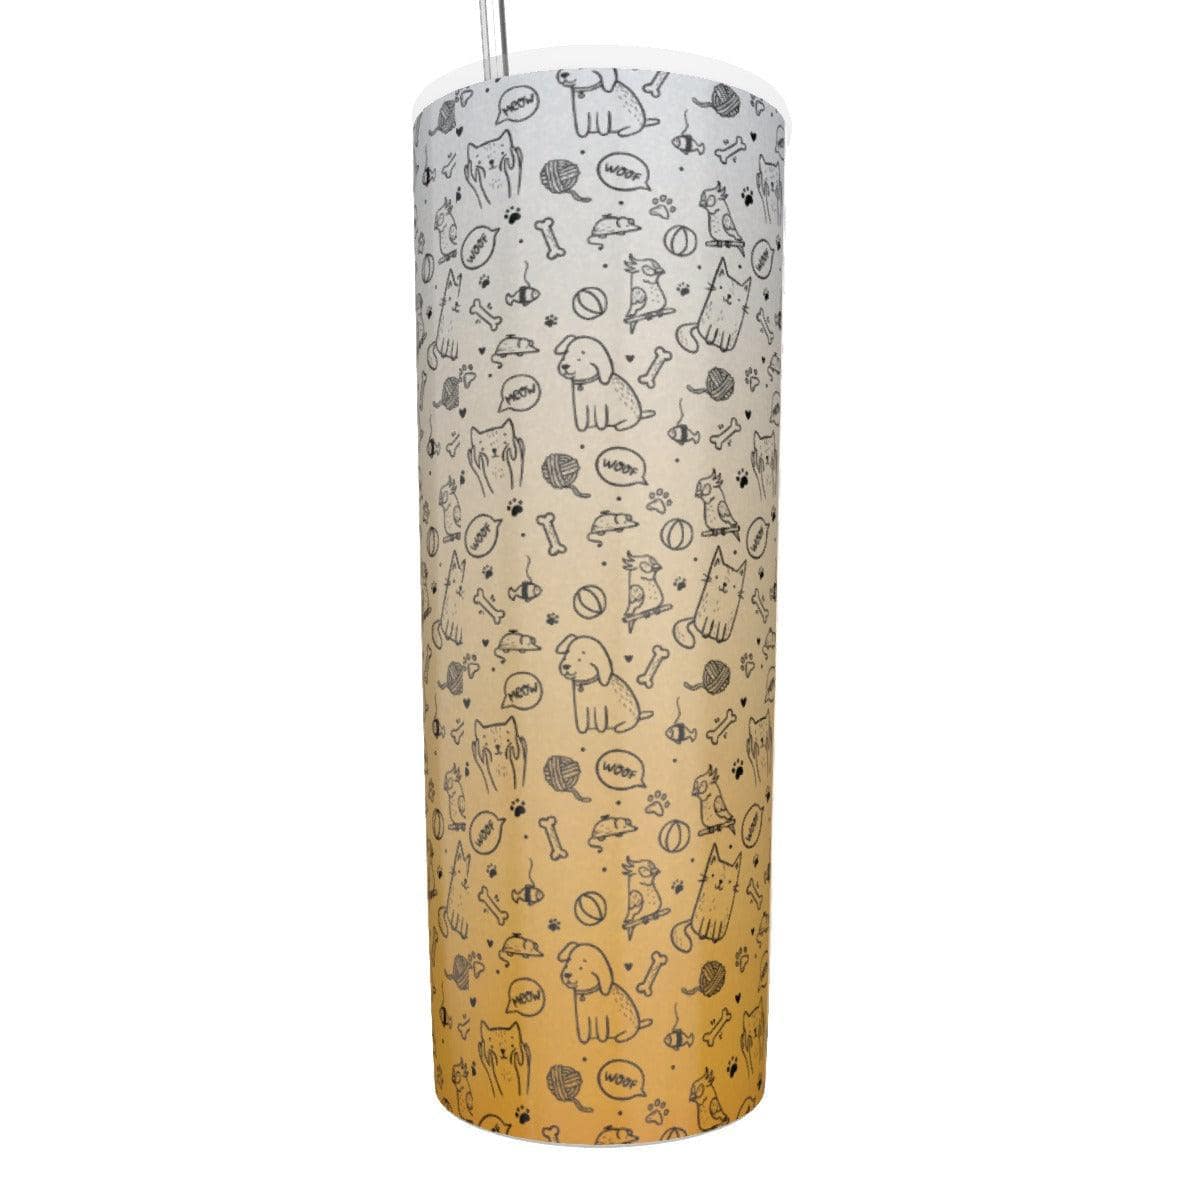 Vet Animal Prints Tumbler With Stainless Steel Straw 20oz - Thumbedtreats